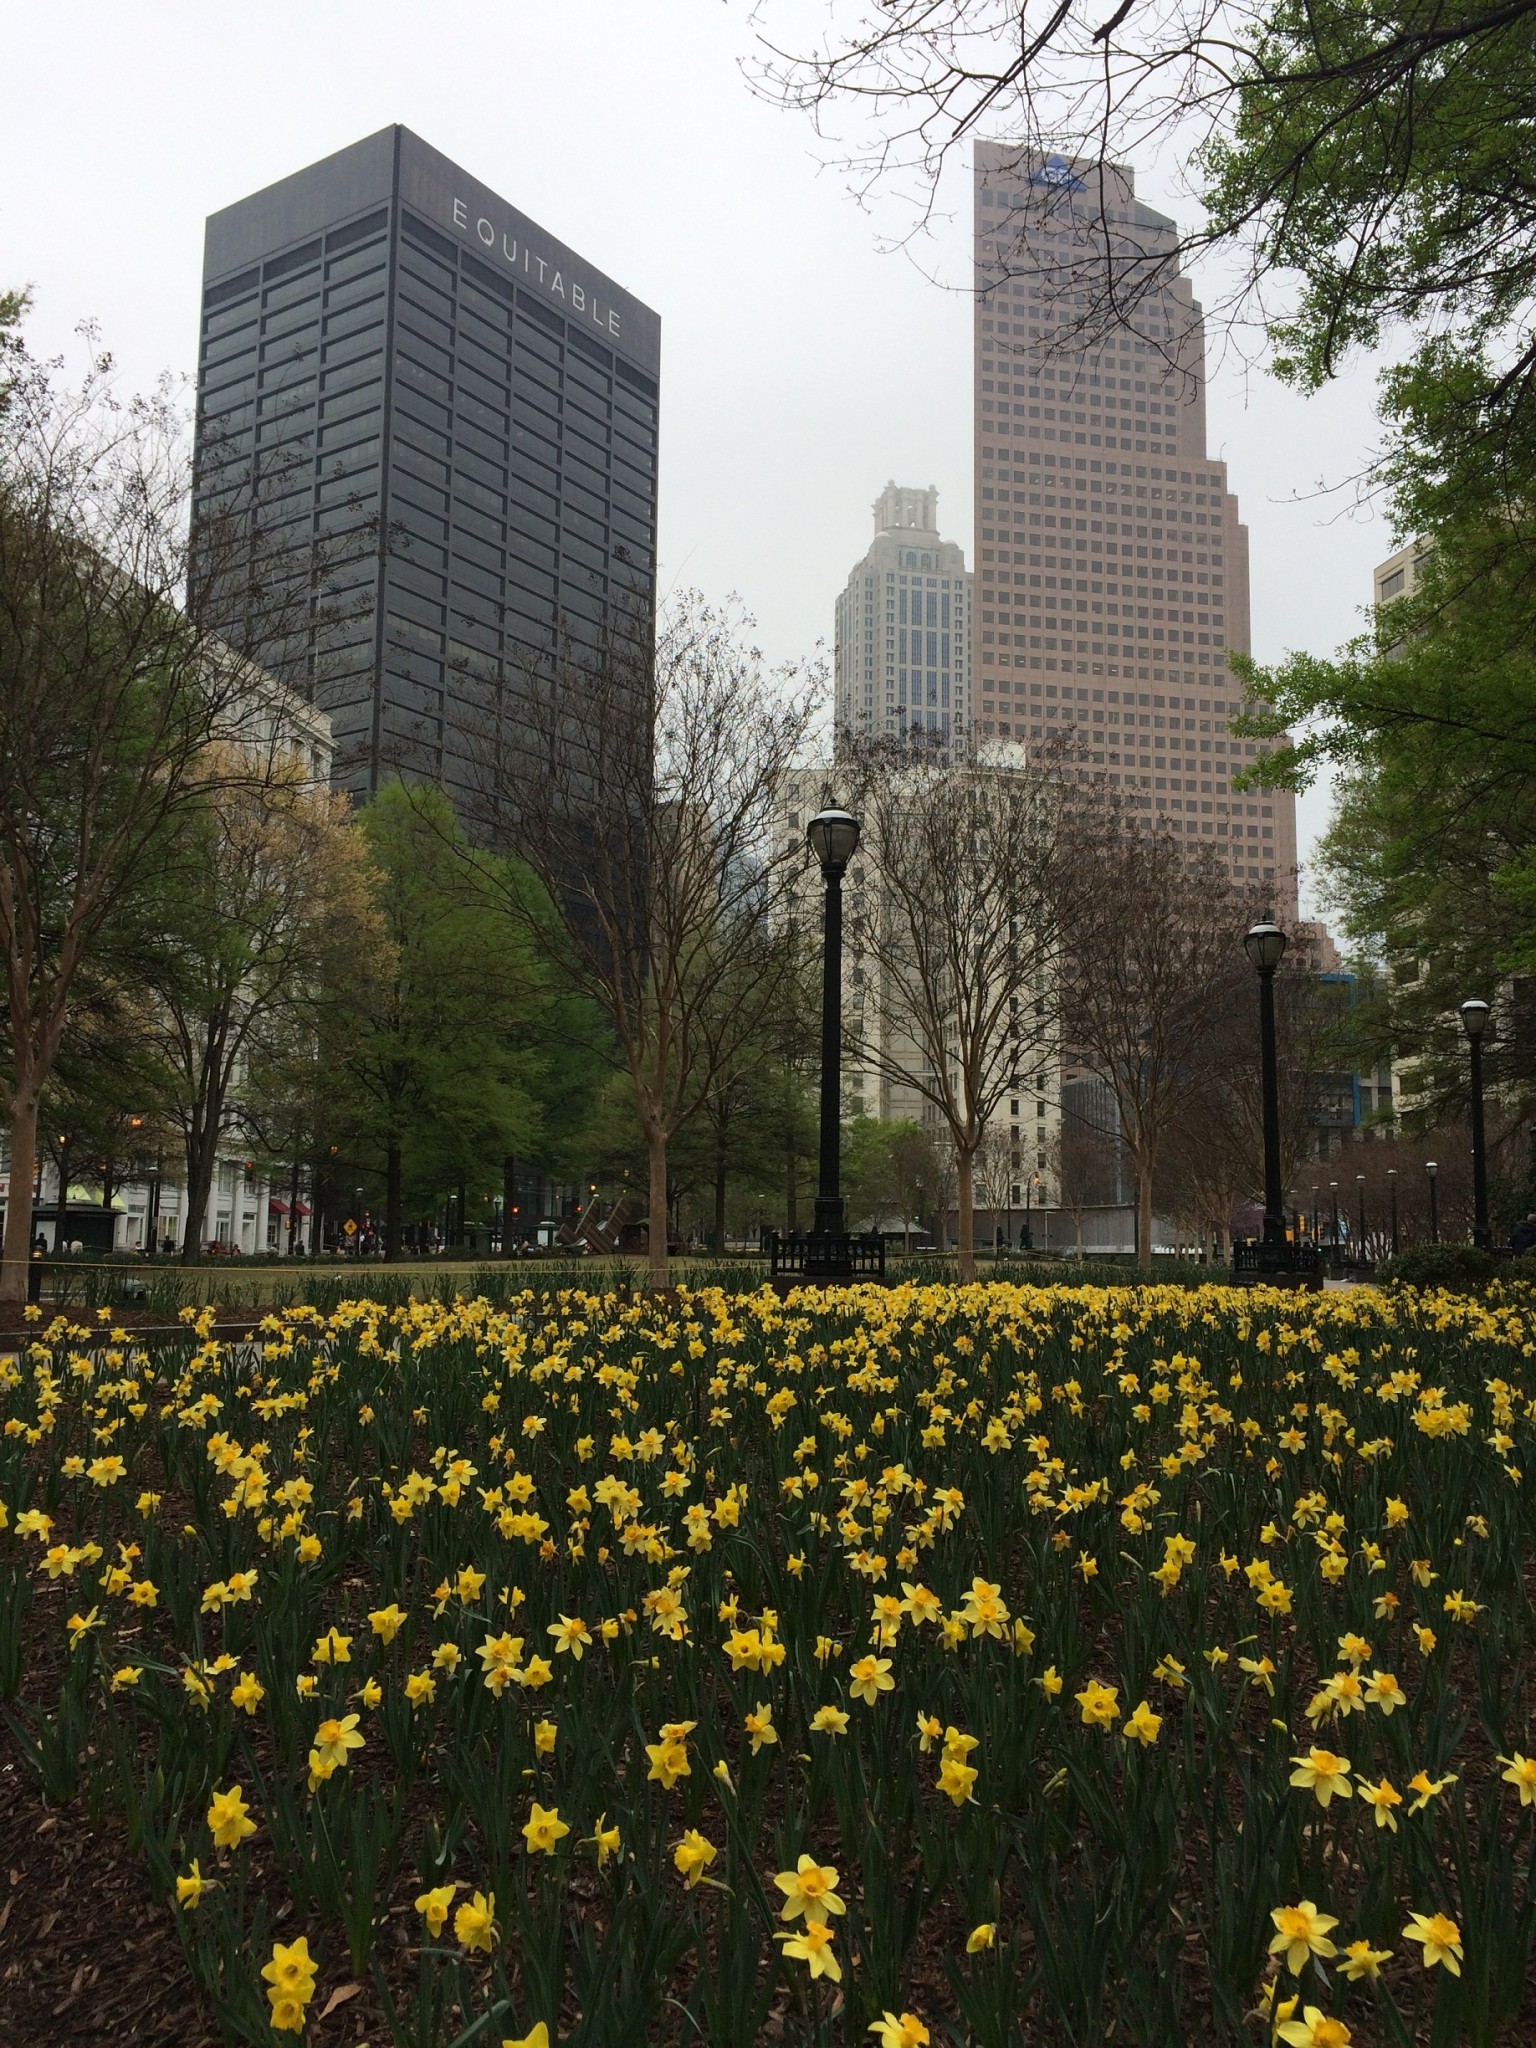 Daffodils in Downtown Atlanta by Odetta MacLeish-White